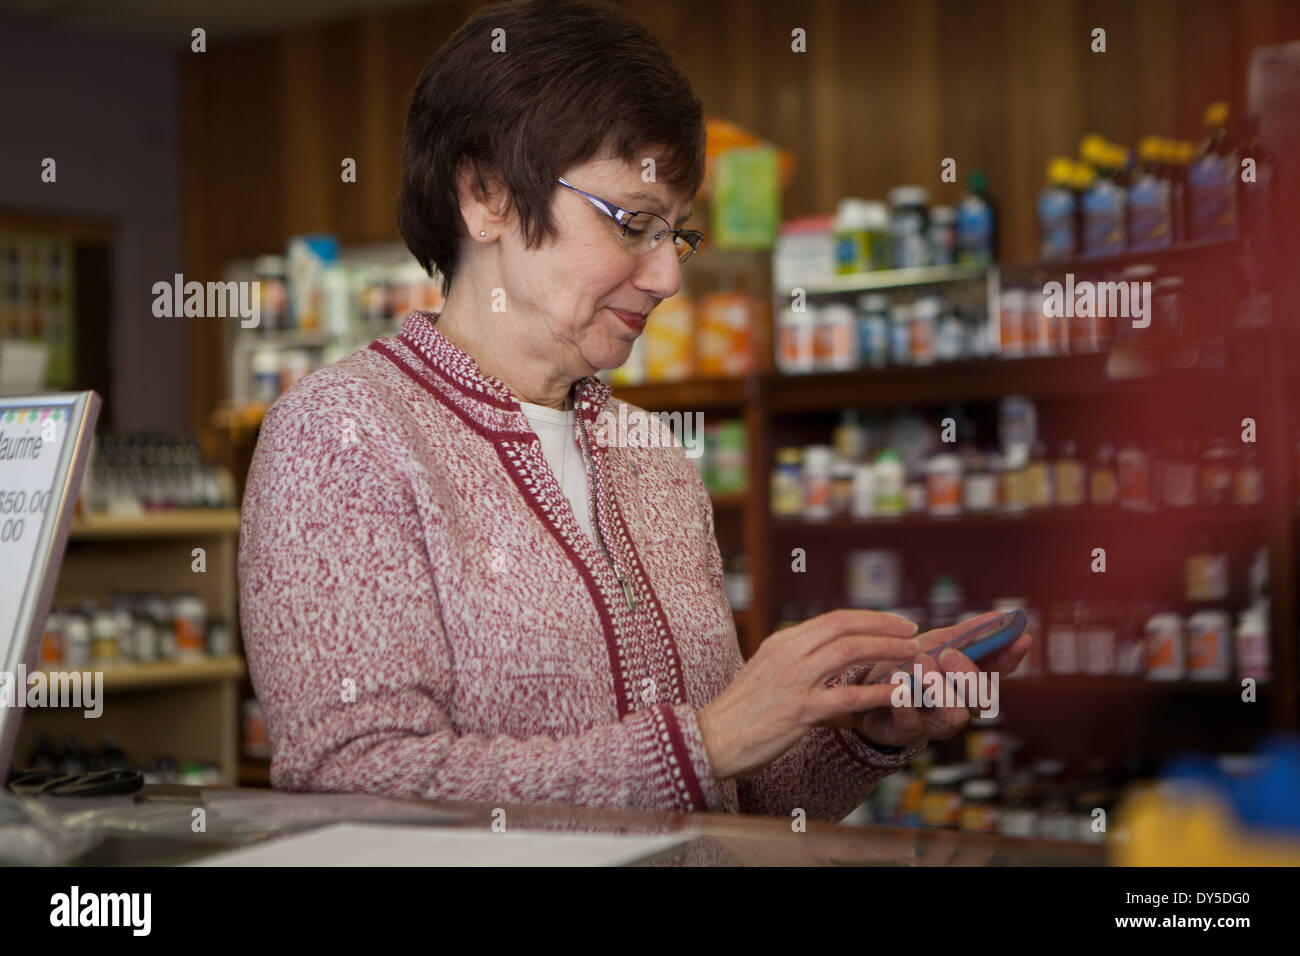 Owner of health foods store using smartphone Stock Photo